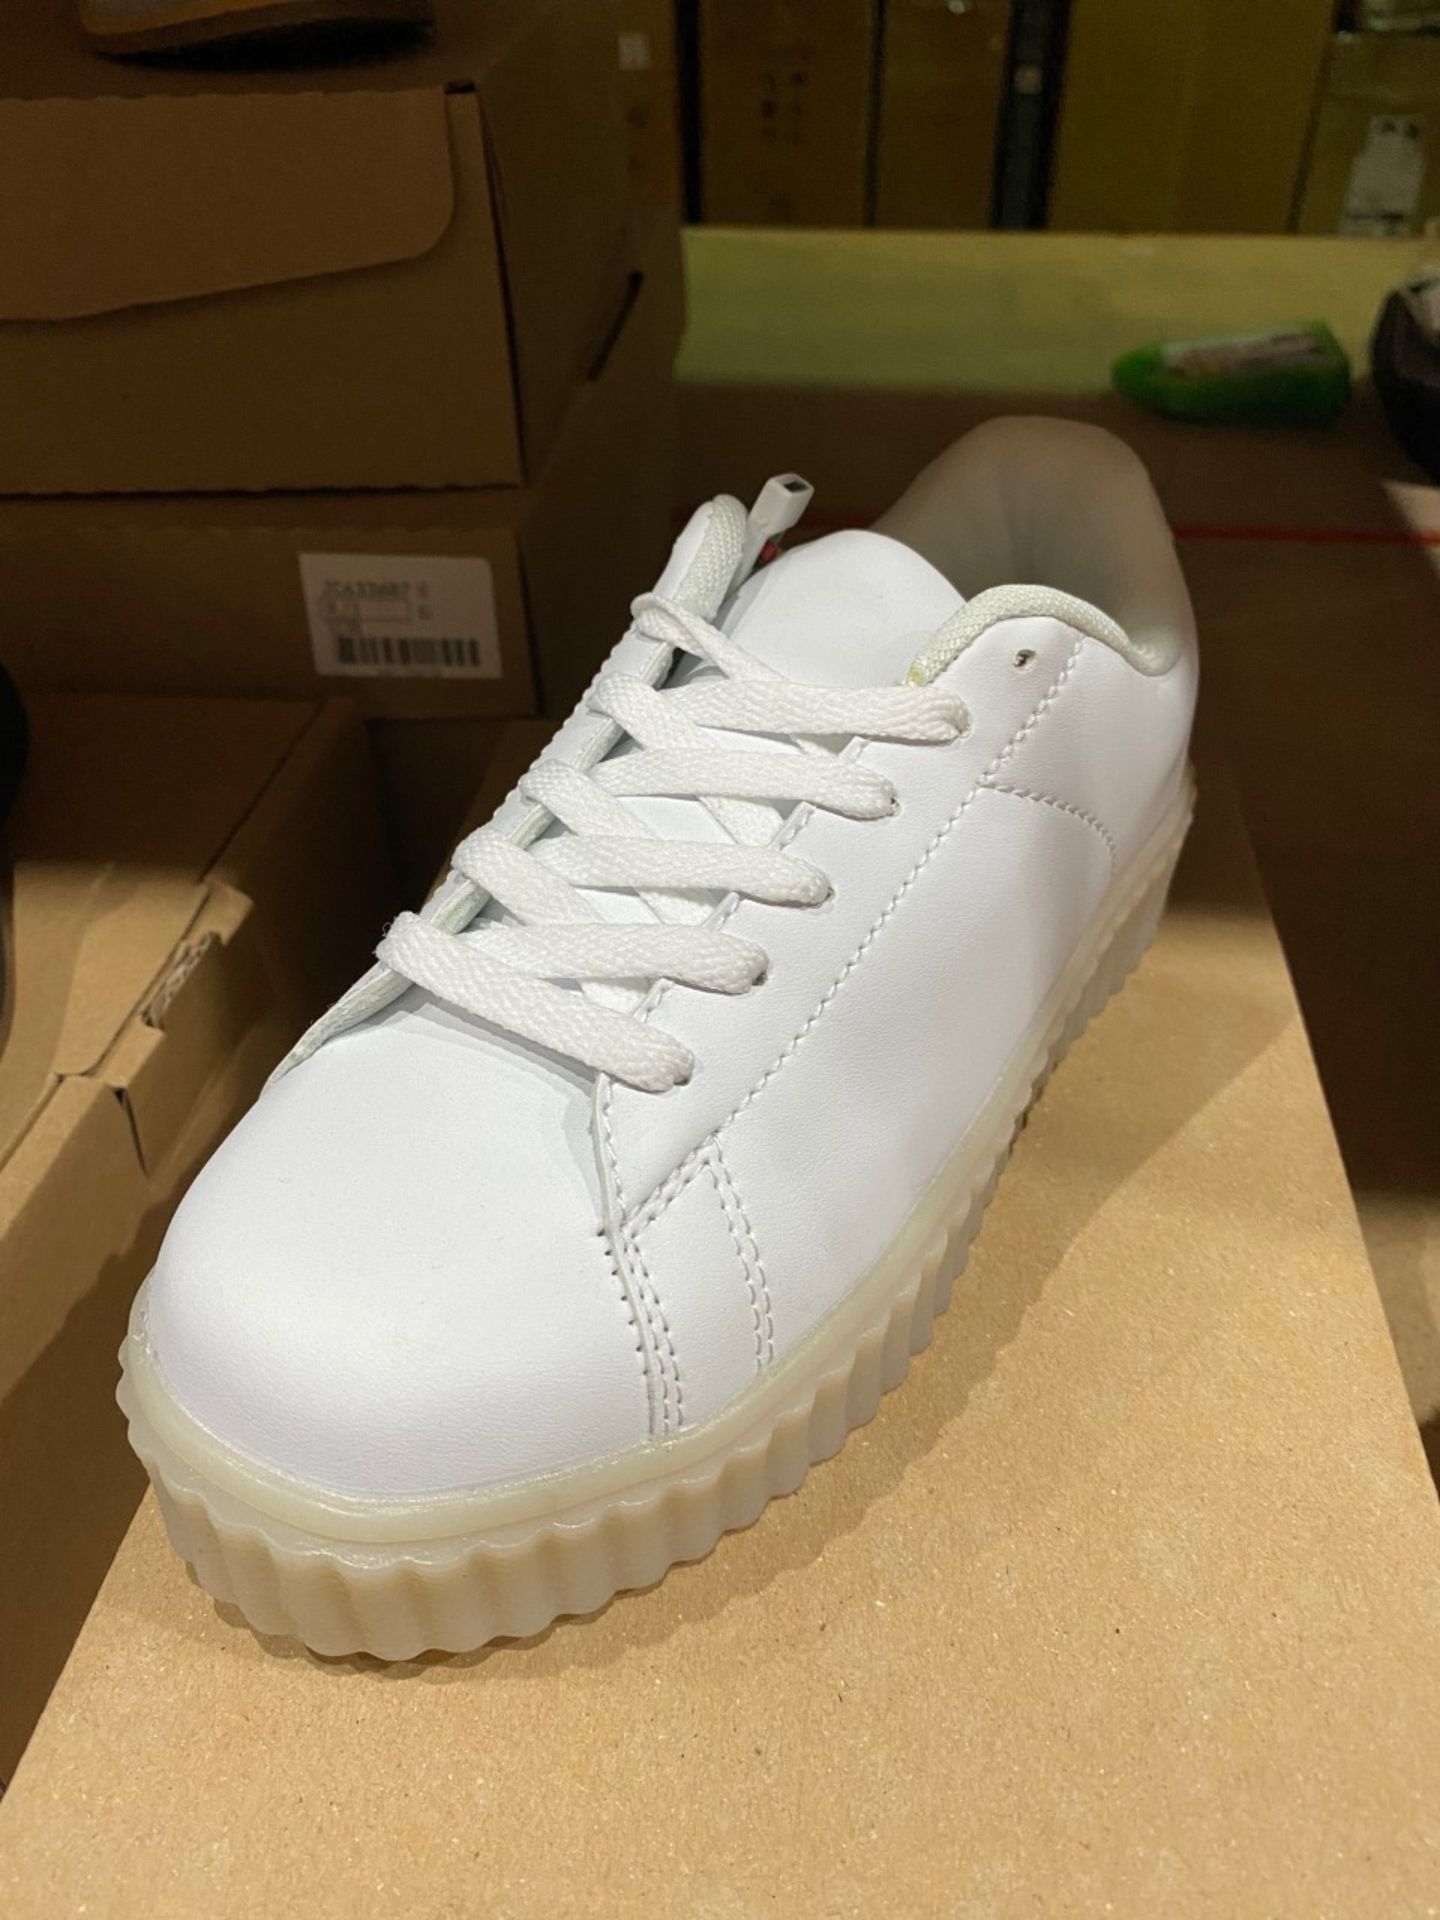 NEW & BOXED KIDS DIVISION WHITE TRAINER SIZE JUNIOR 2 (424/28) - Image 3 of 3